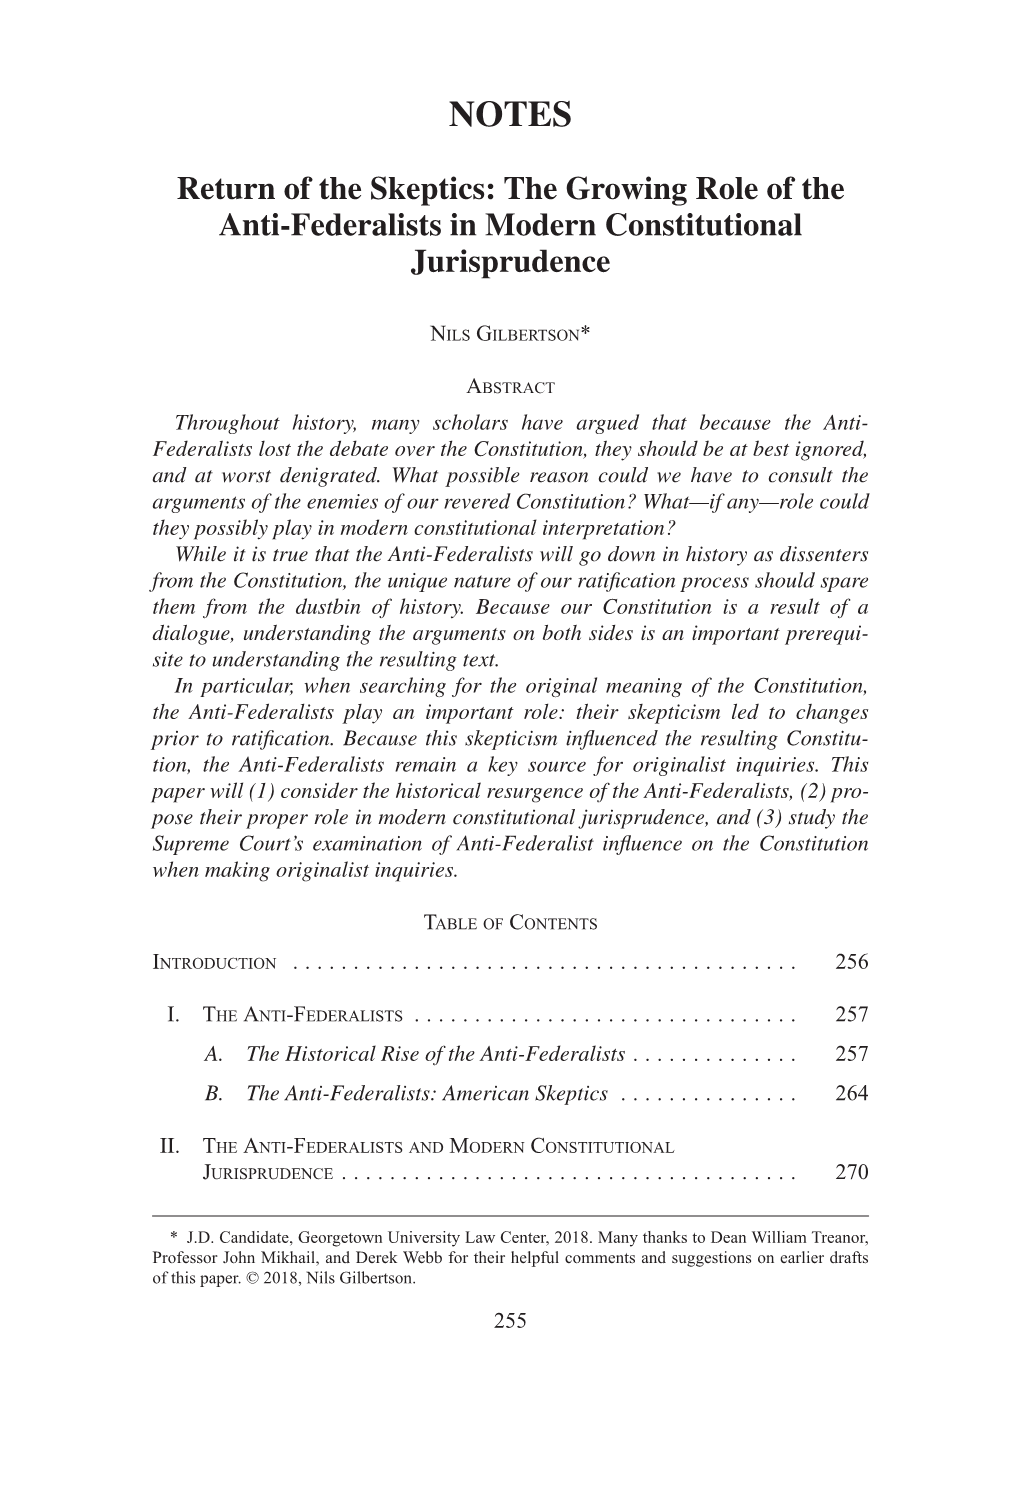 Return of the Skeptics: the Growing Role of the Anti-Federalists in Modern Constitutional Jurisprudence